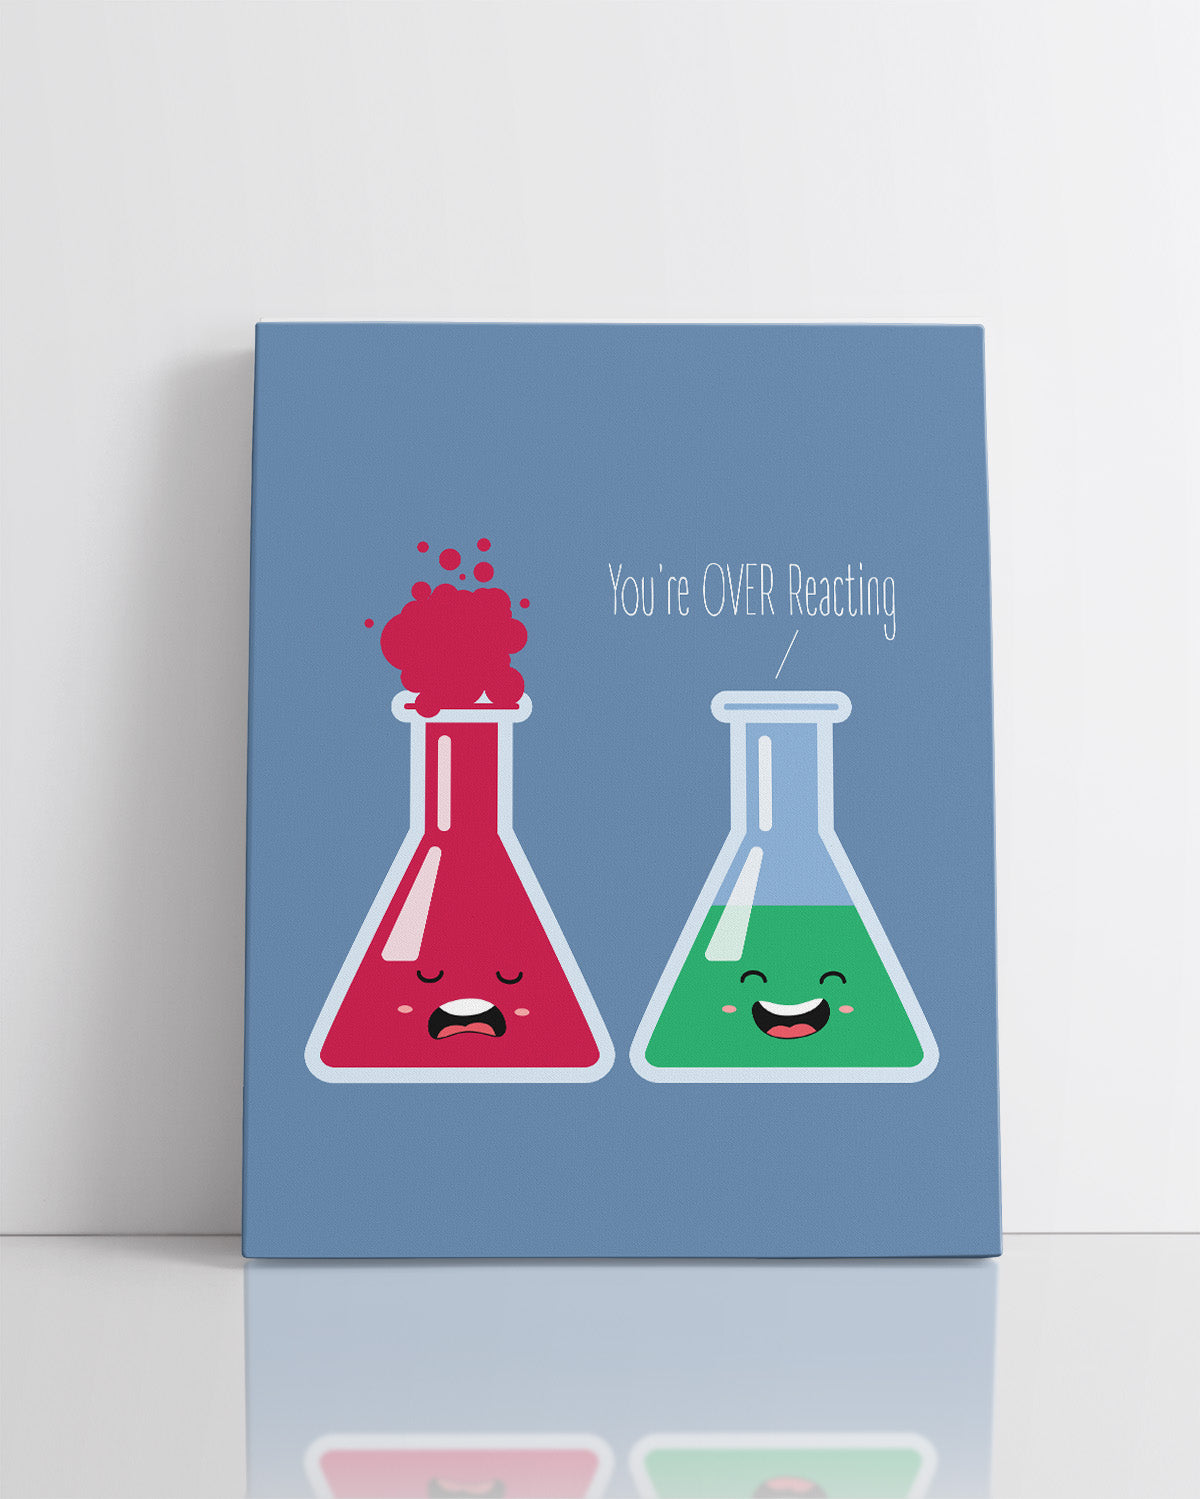 You're OVER Reacting science pun wall decor - Funny chemistry art for middle school classroom - Humorous wall art for teachers